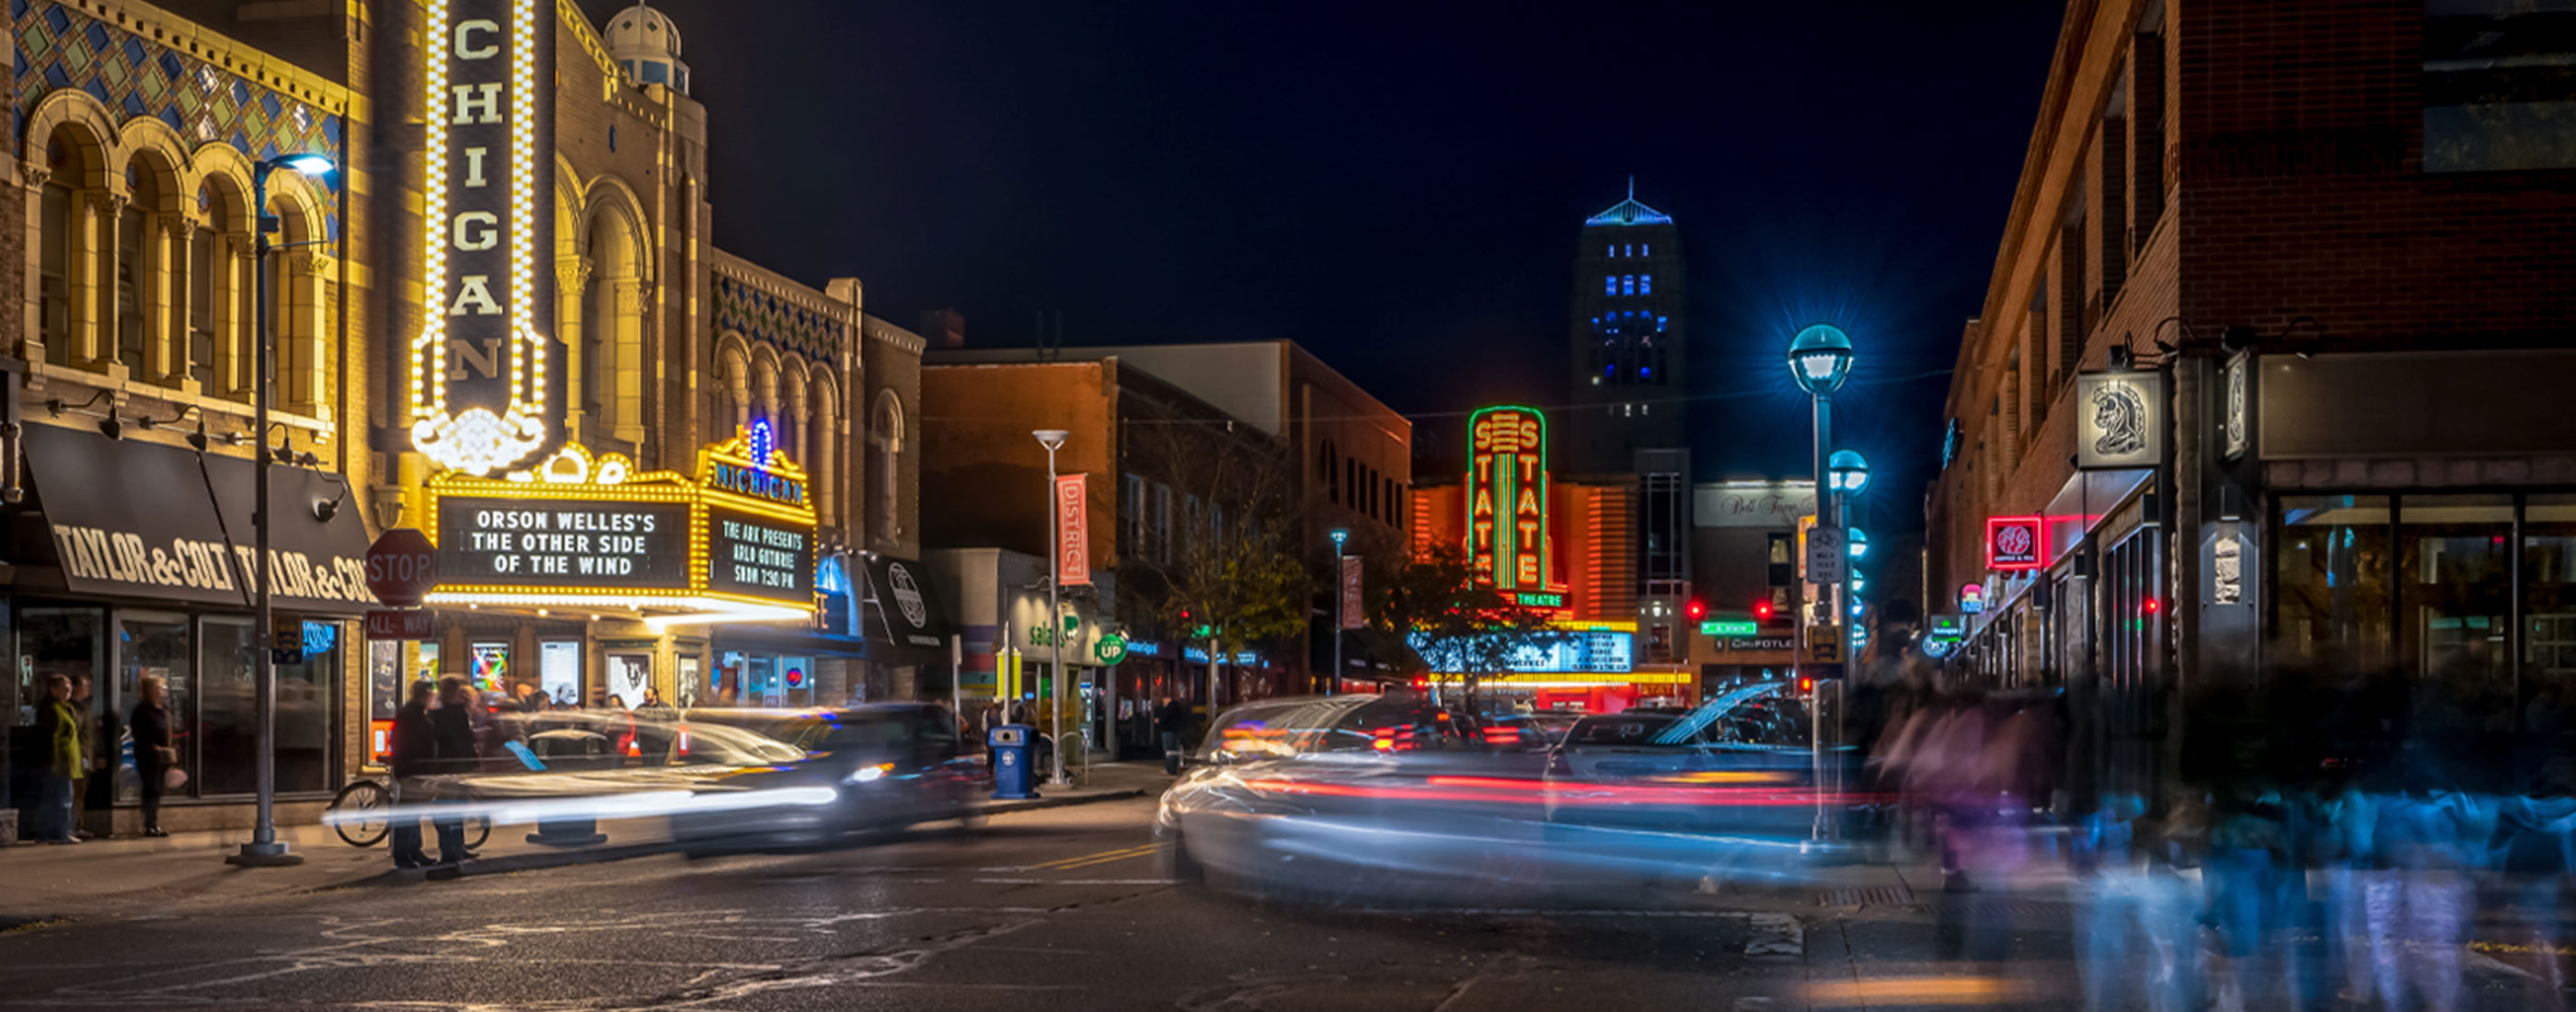 Ann Arbor’s streetlights keep the city bright at night thanks to data-driven analysis from OHM Advisors.